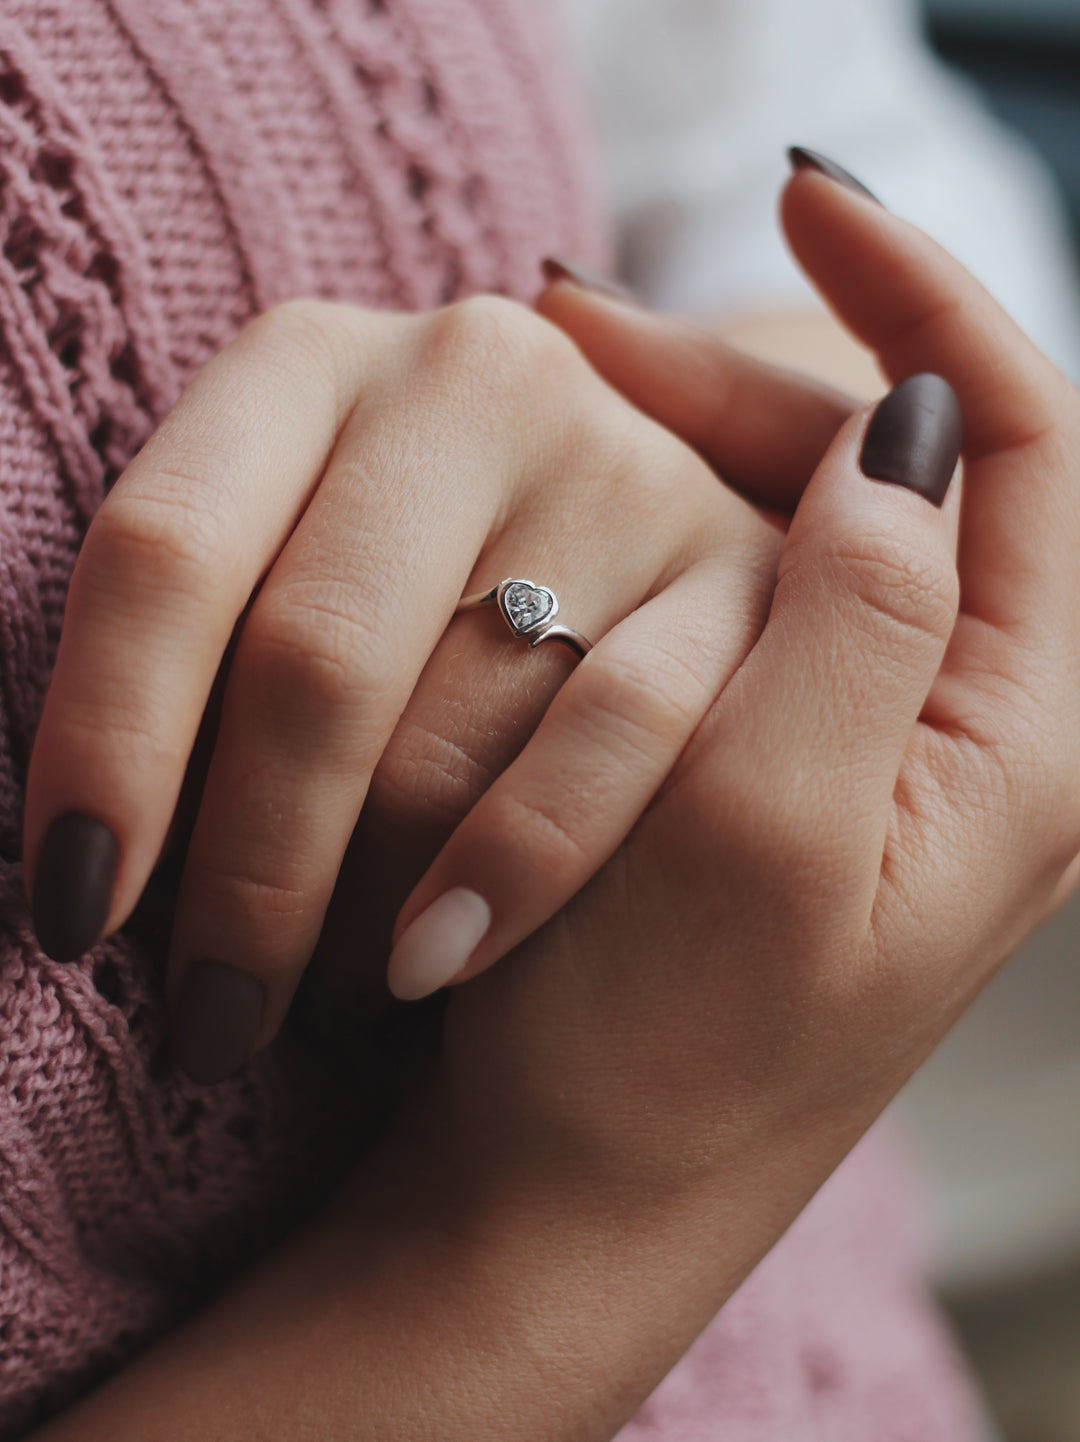 How To Buy an Engagement Ring Online